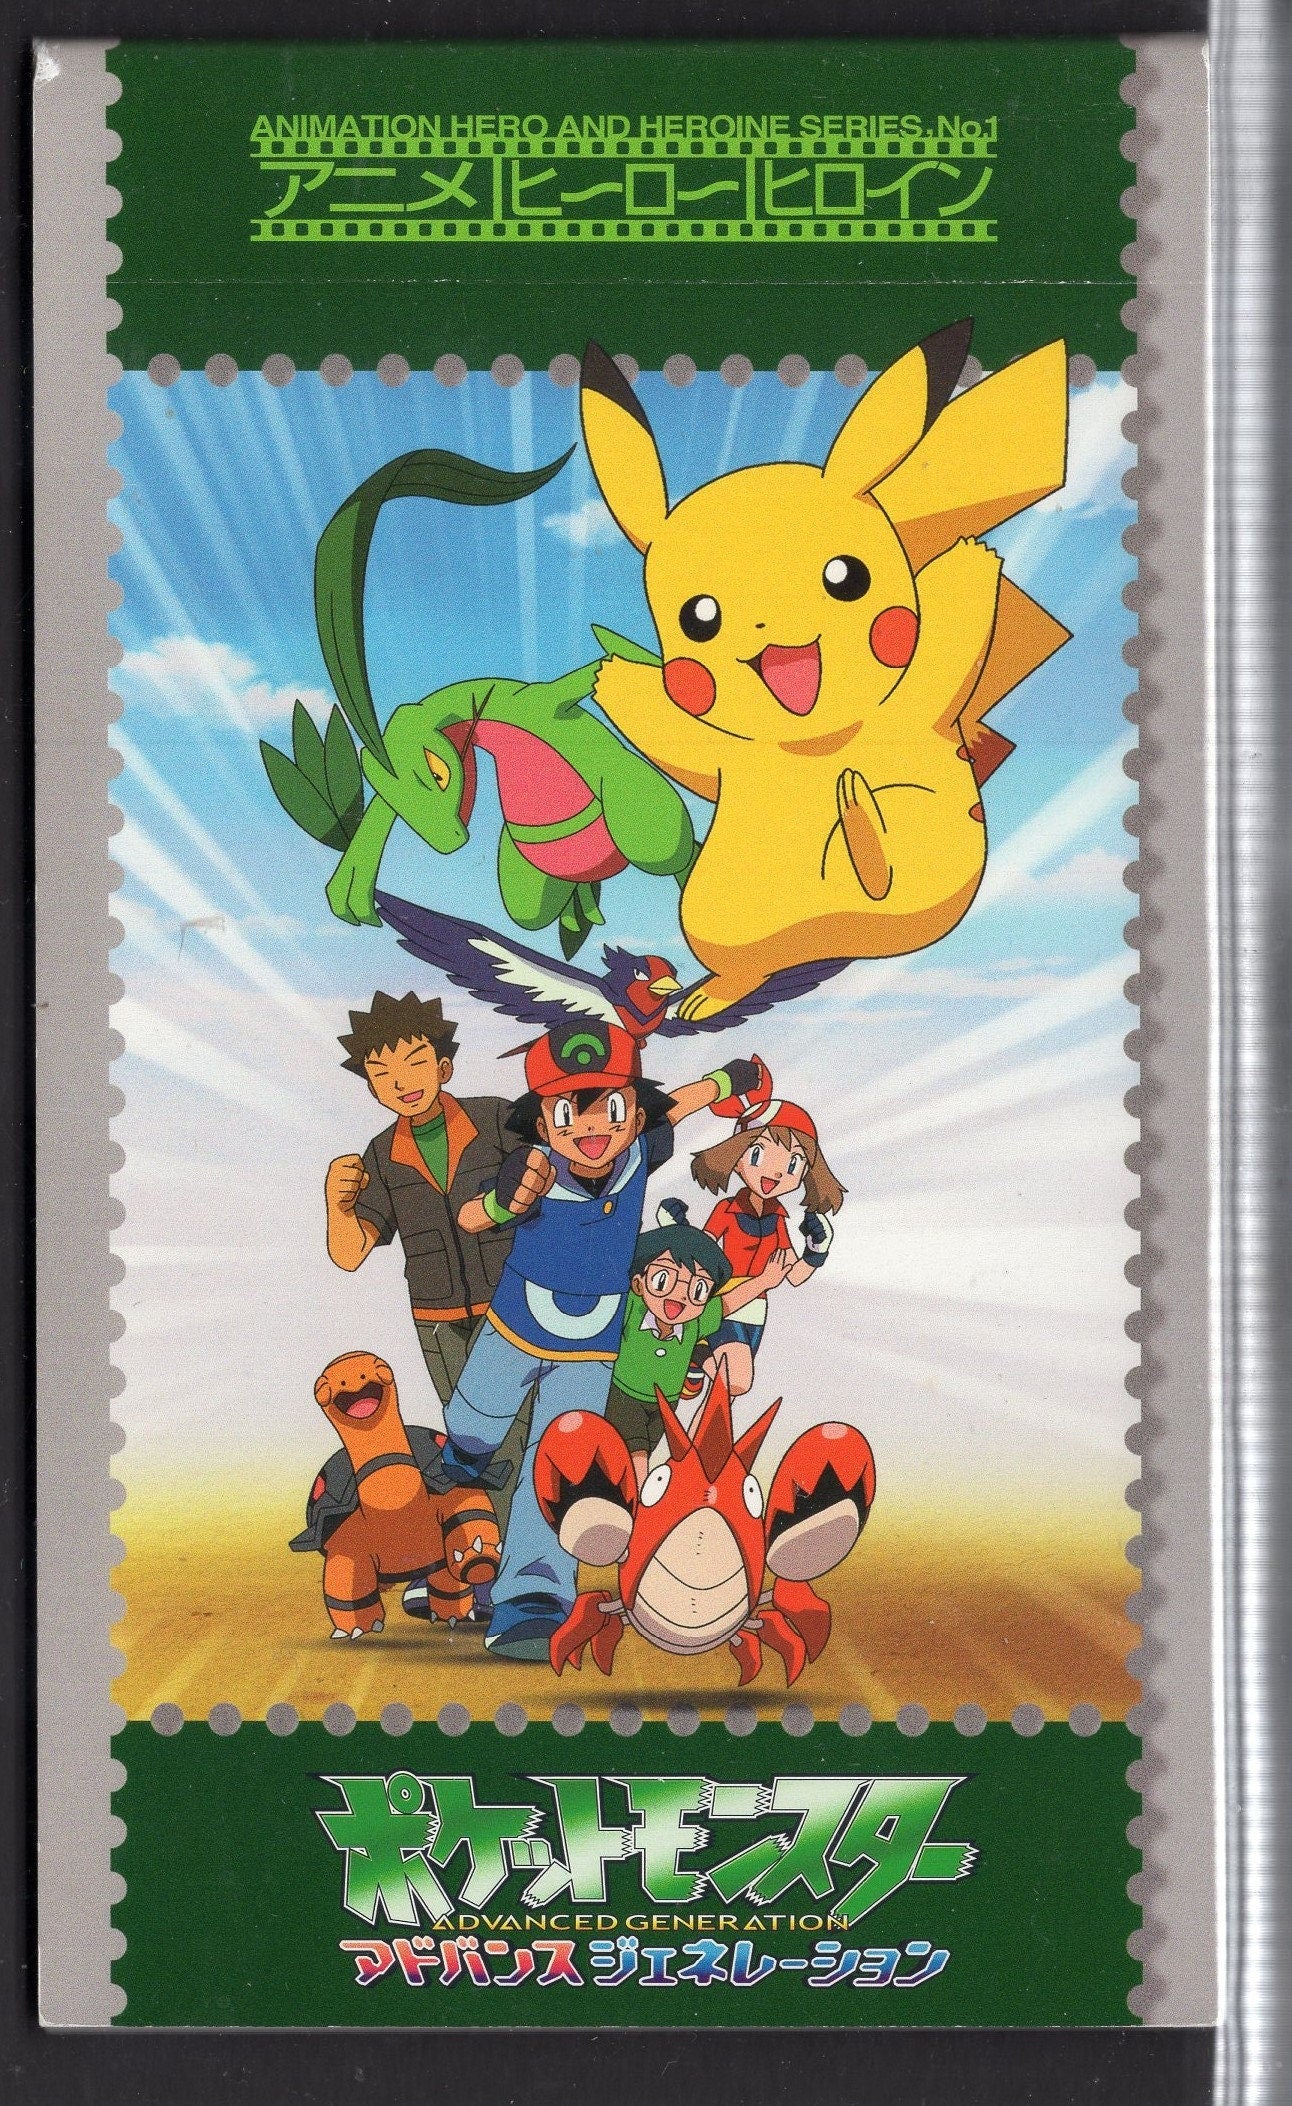 POKEMON STAMP BOOKLET from Japan Scarce Complete with Pikachu Mew Gonbe x2 4 Stamps +8 Pokemon Themed Postal Cards Issued in 2005-